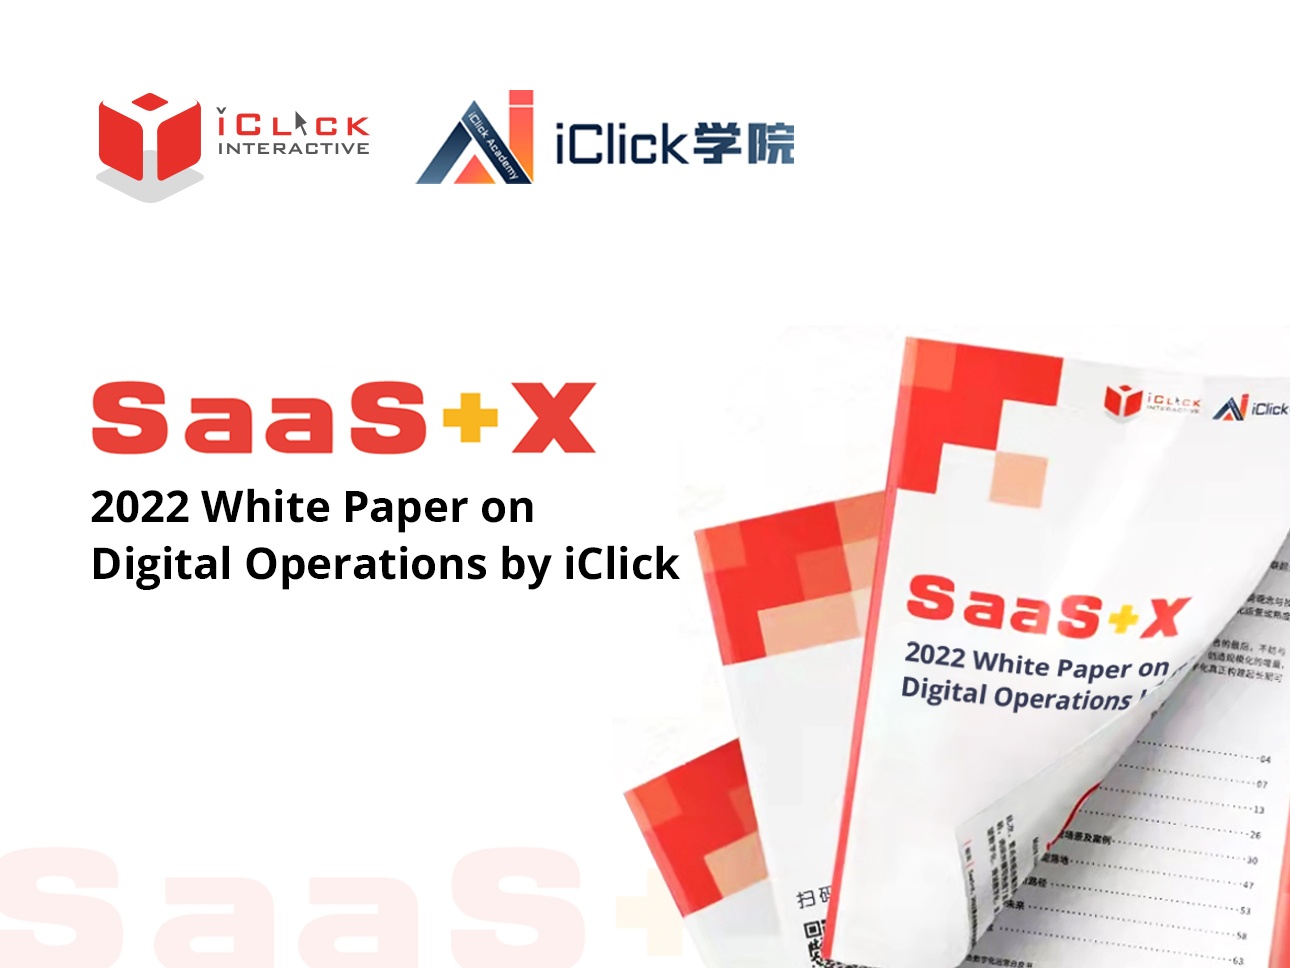 iClick Interactive Releases “SaaS+X 2022 White Paper on Digital Operations